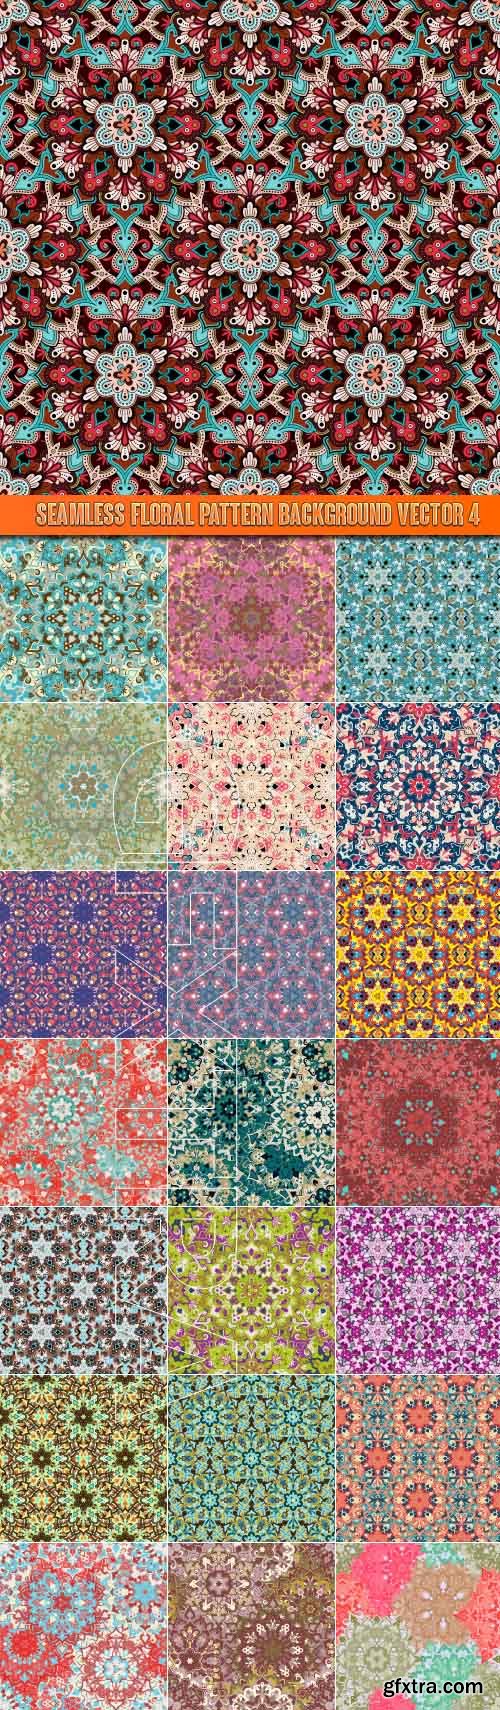 Seamless floral pattern background vector 4